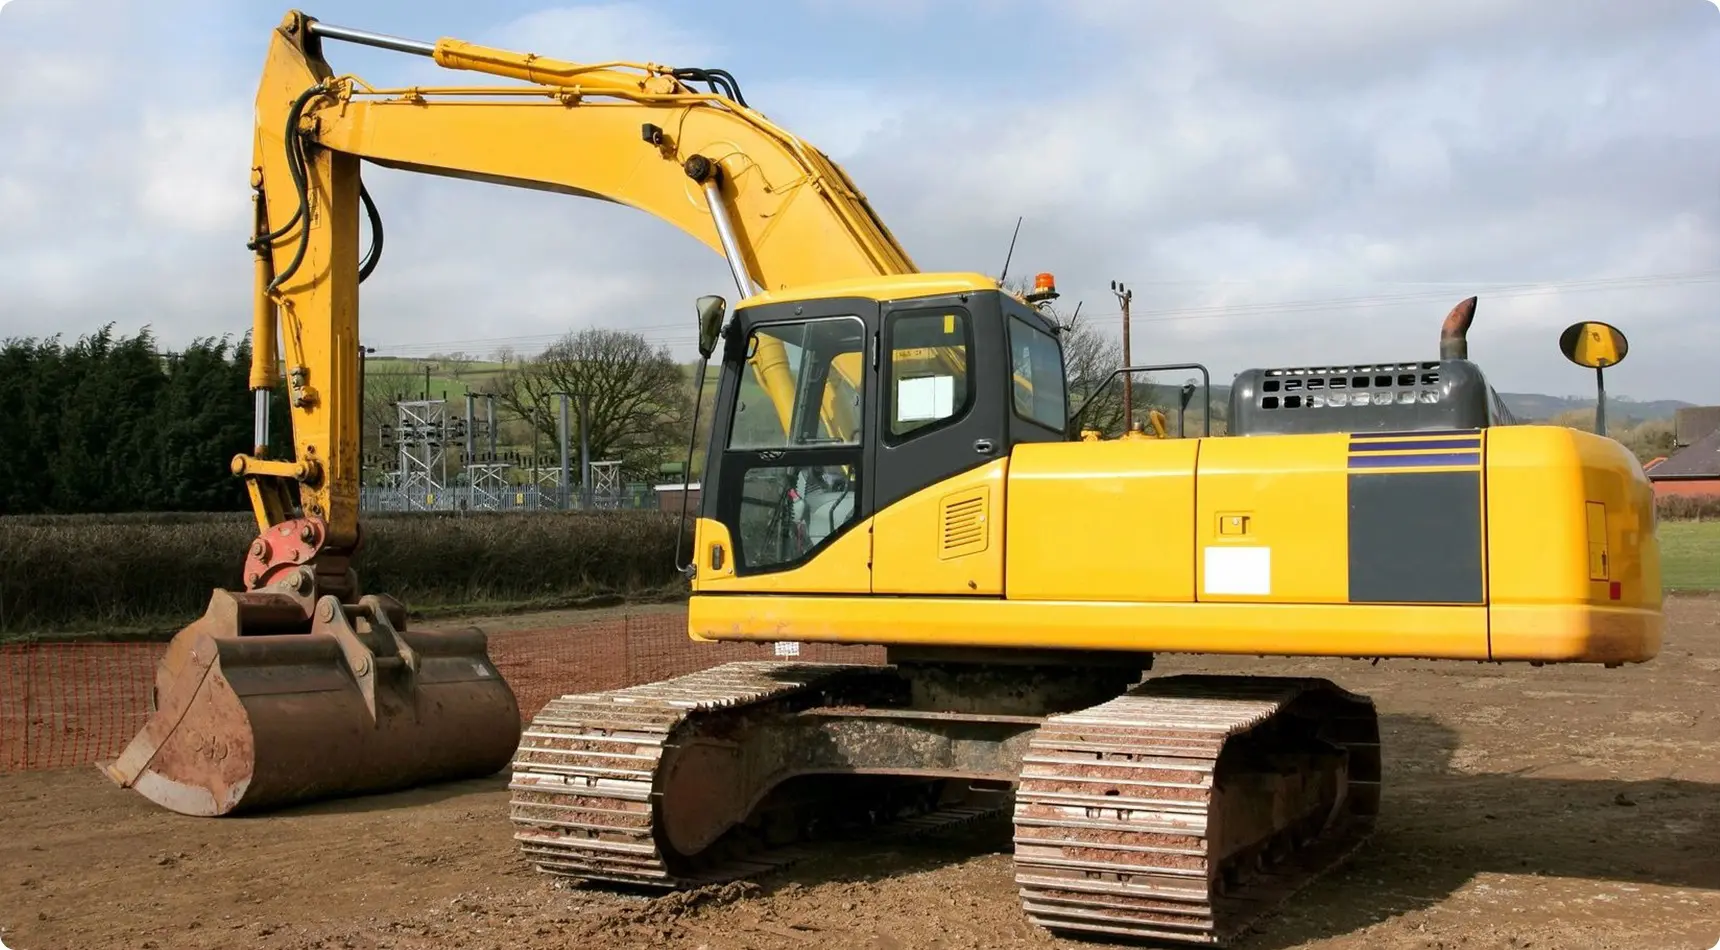 A yellow and black excavator is parked on the ground